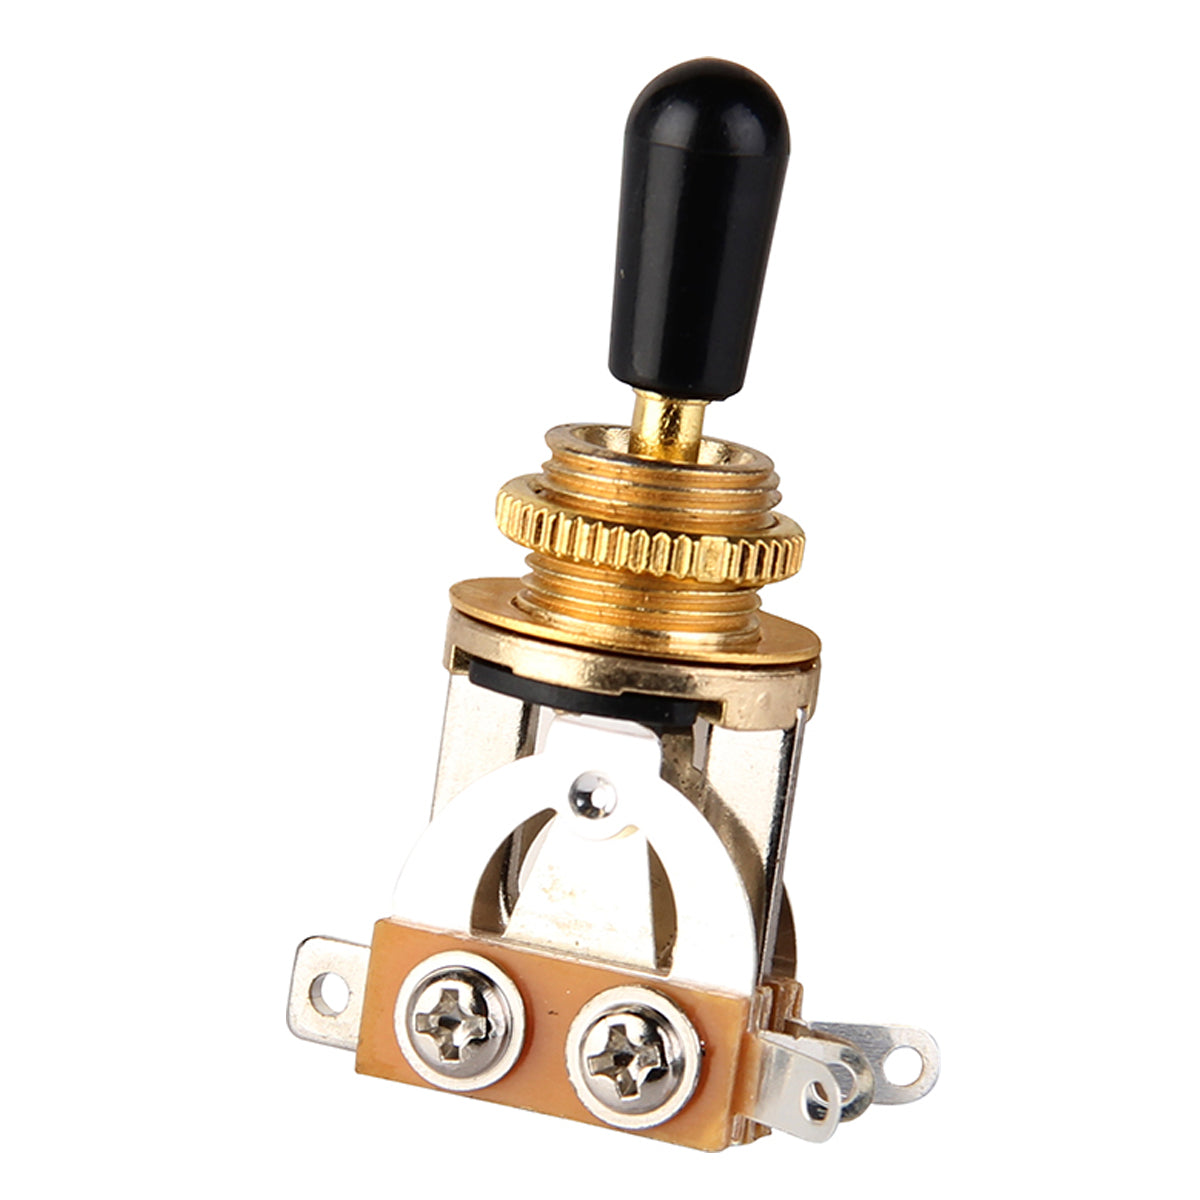 Musiclily Metric 3 Way Guitar Pickup Toggle Switch, Gold Top with Cream Tip